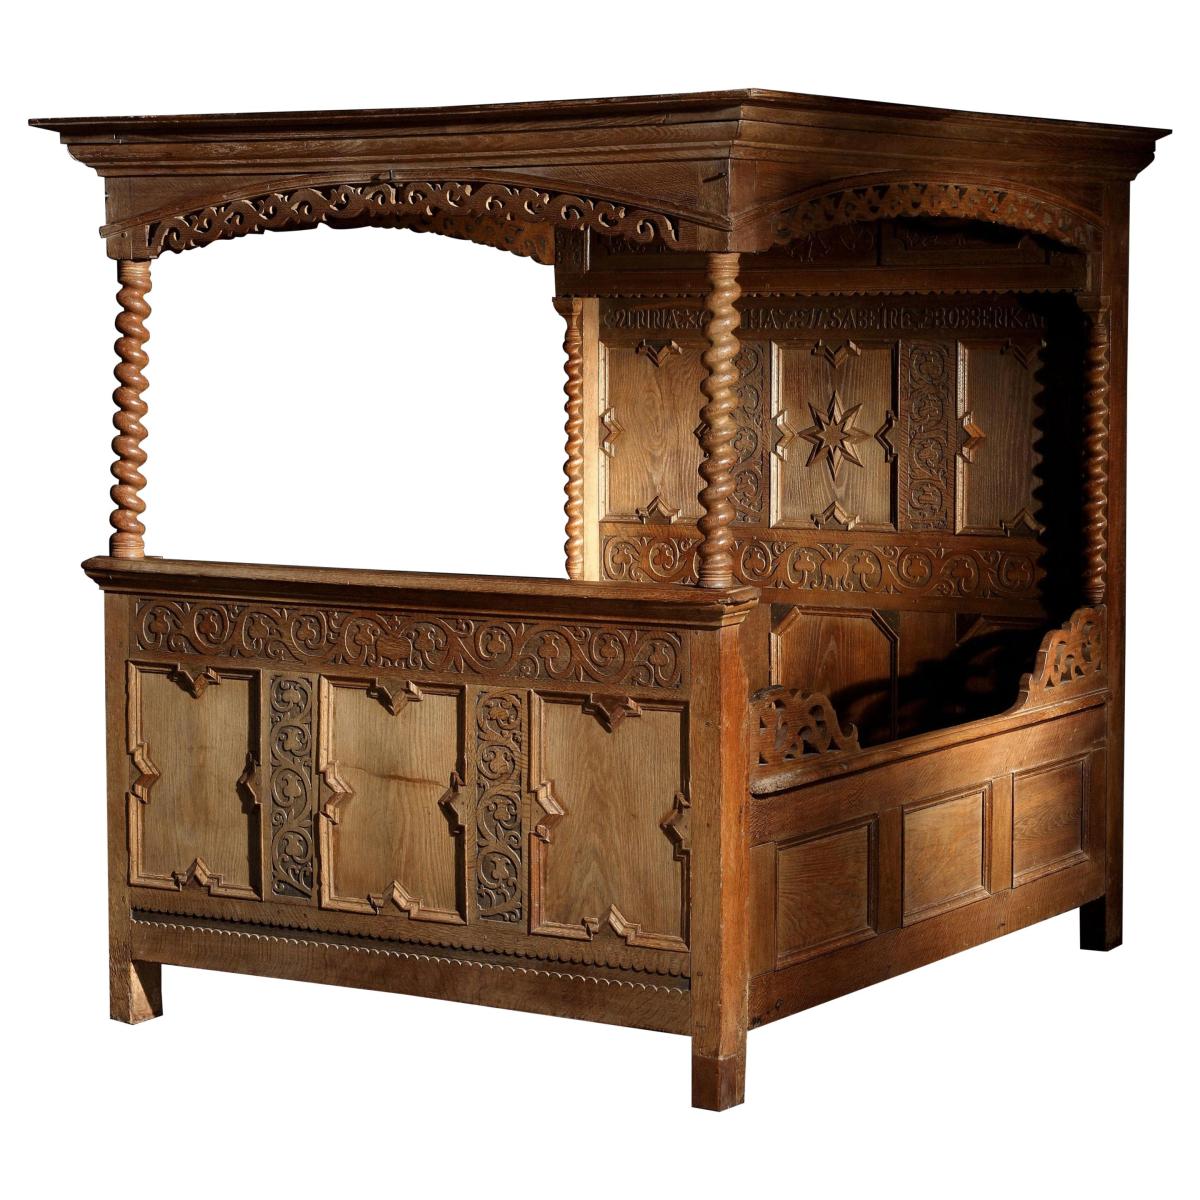 A mid-17th century, oak, tester, double bed with cupboard in the headboard, retaining its original iron fasteners